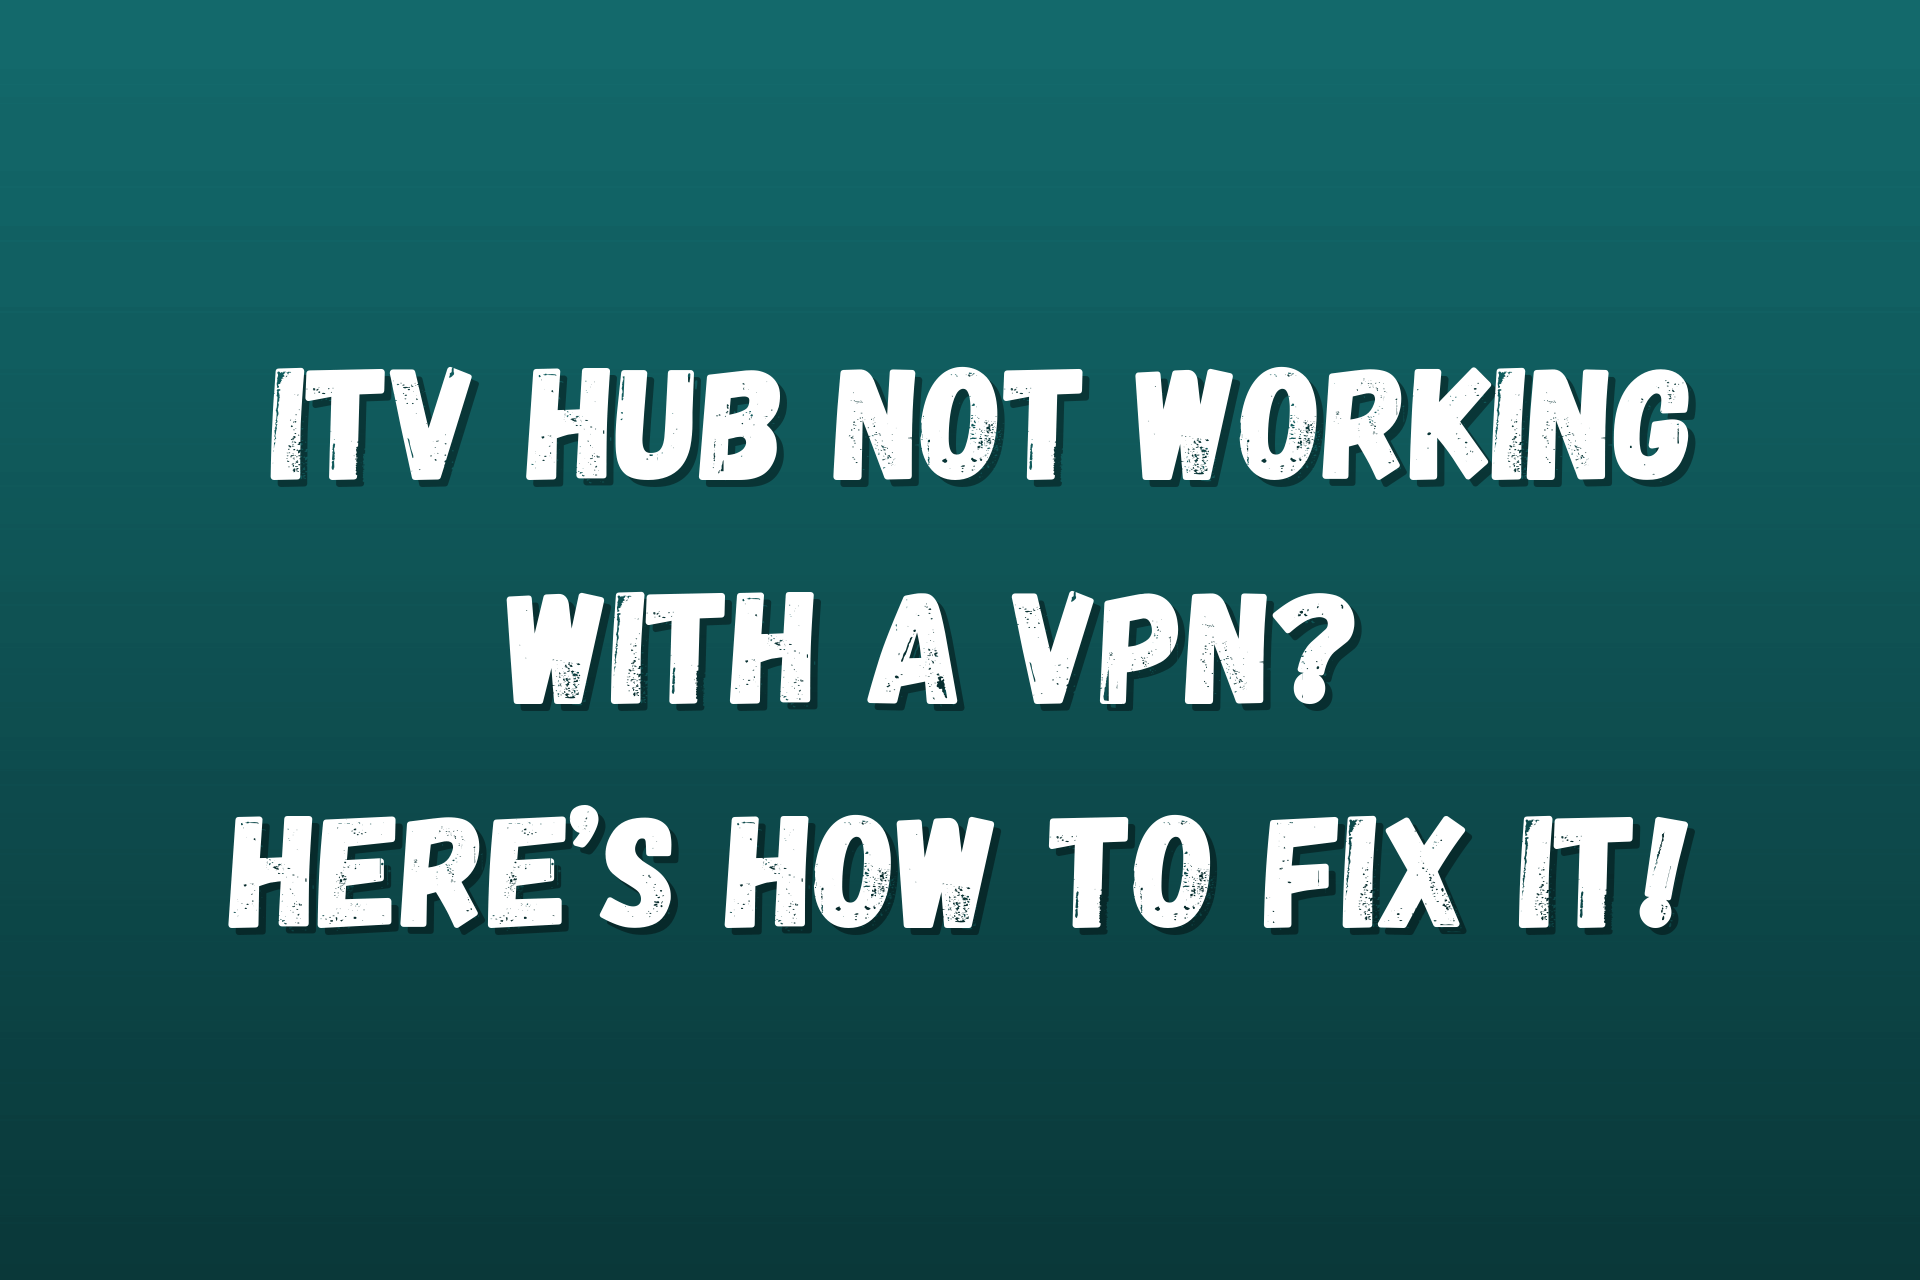 ITV Hub not working with VPN